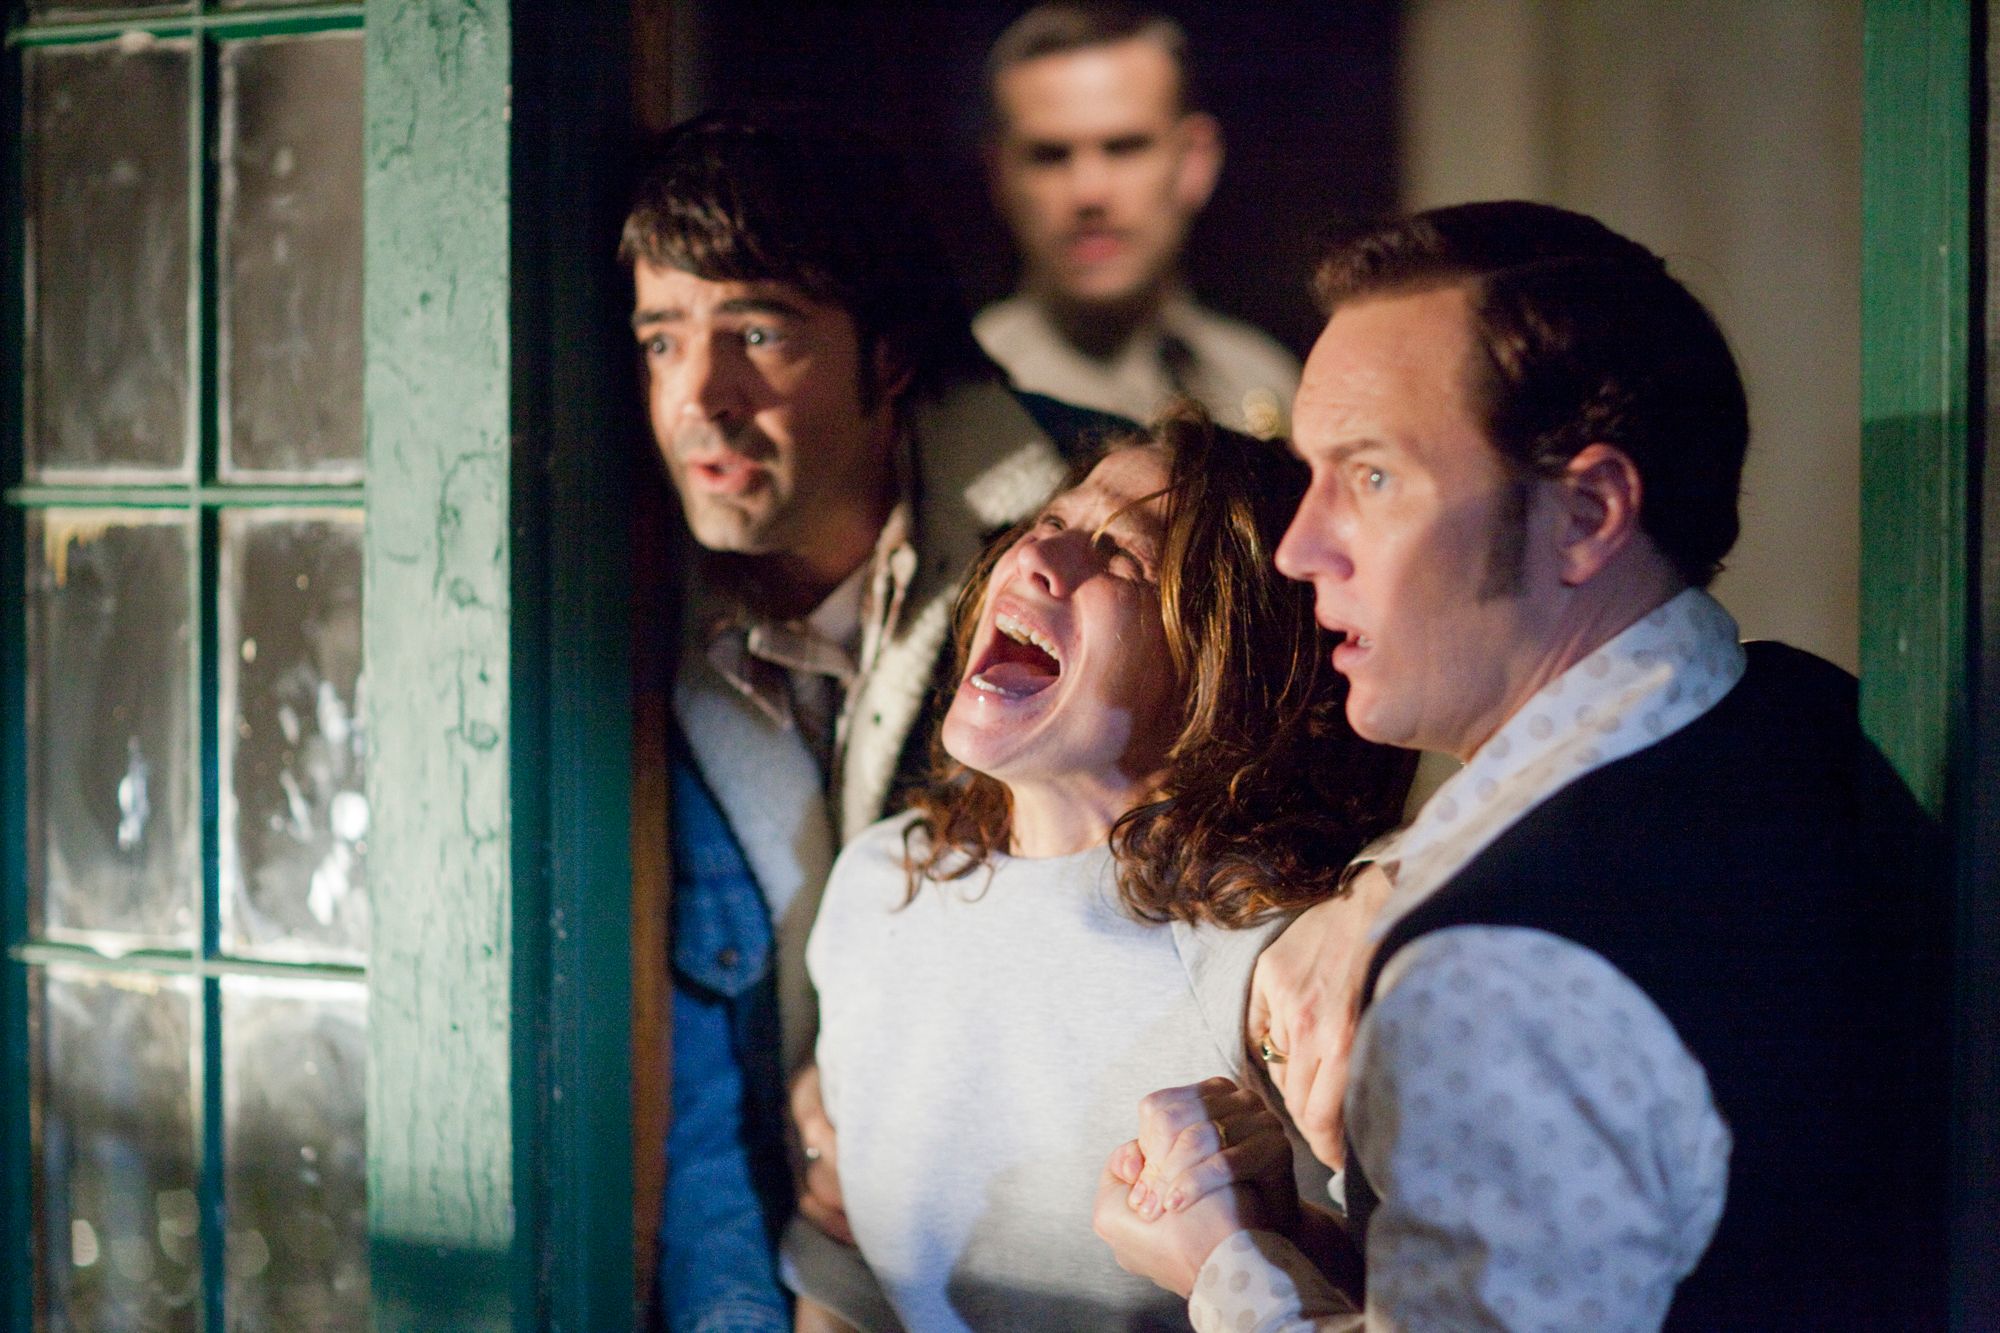 the-conjuring-lily-taylor-patrick-wilson